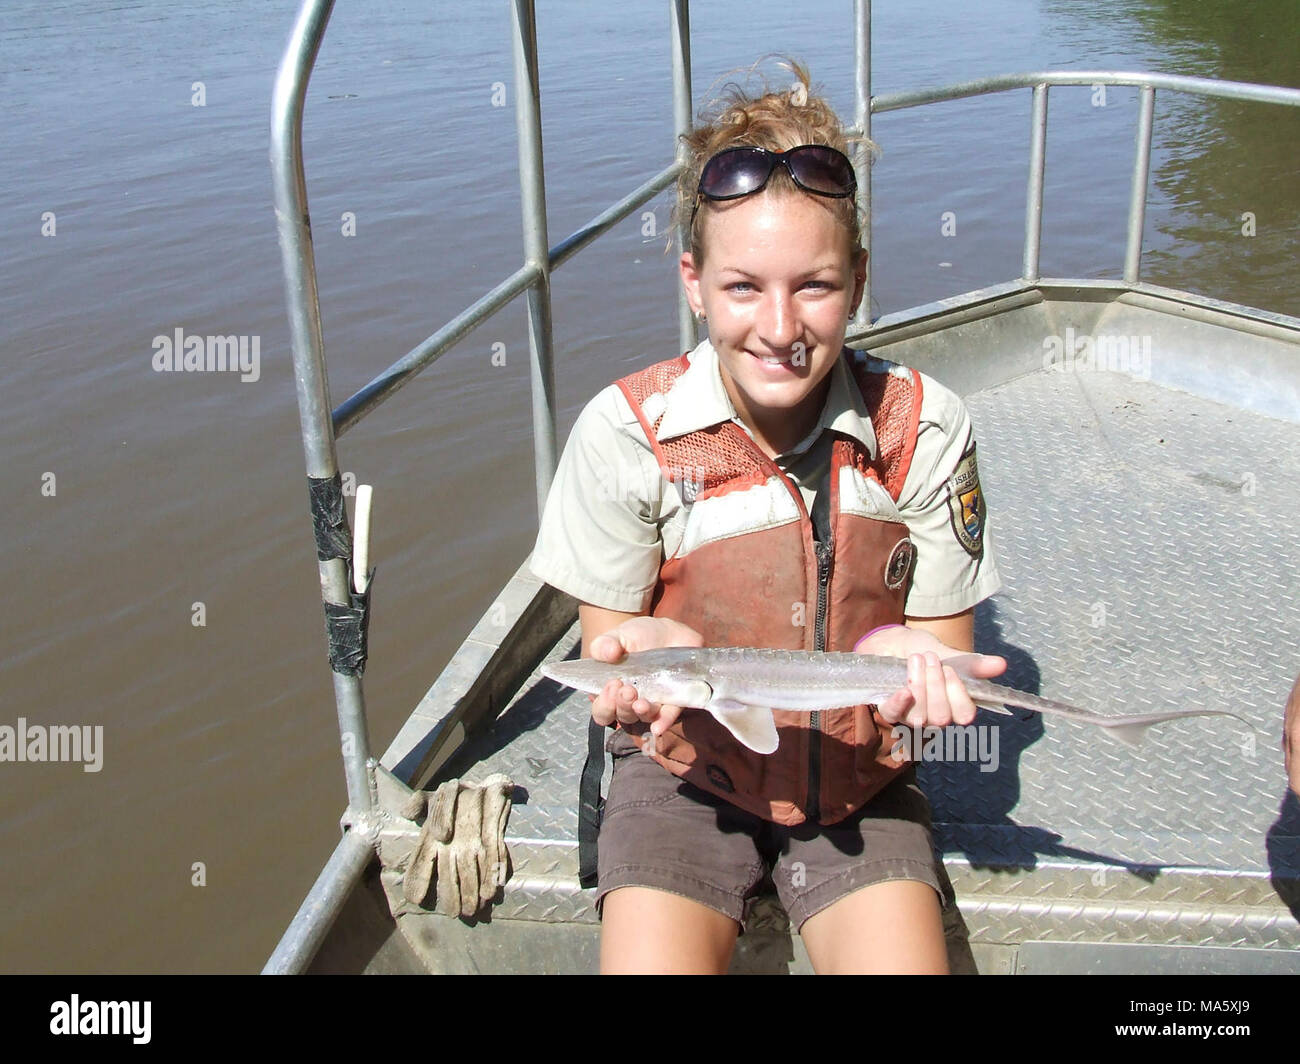 Small fry. U.S. Fish and Wildlife Service employee Randi Preece displays a young endangered pallid sturgeon before releasing it back into the lower Missouri River. Stock Photo